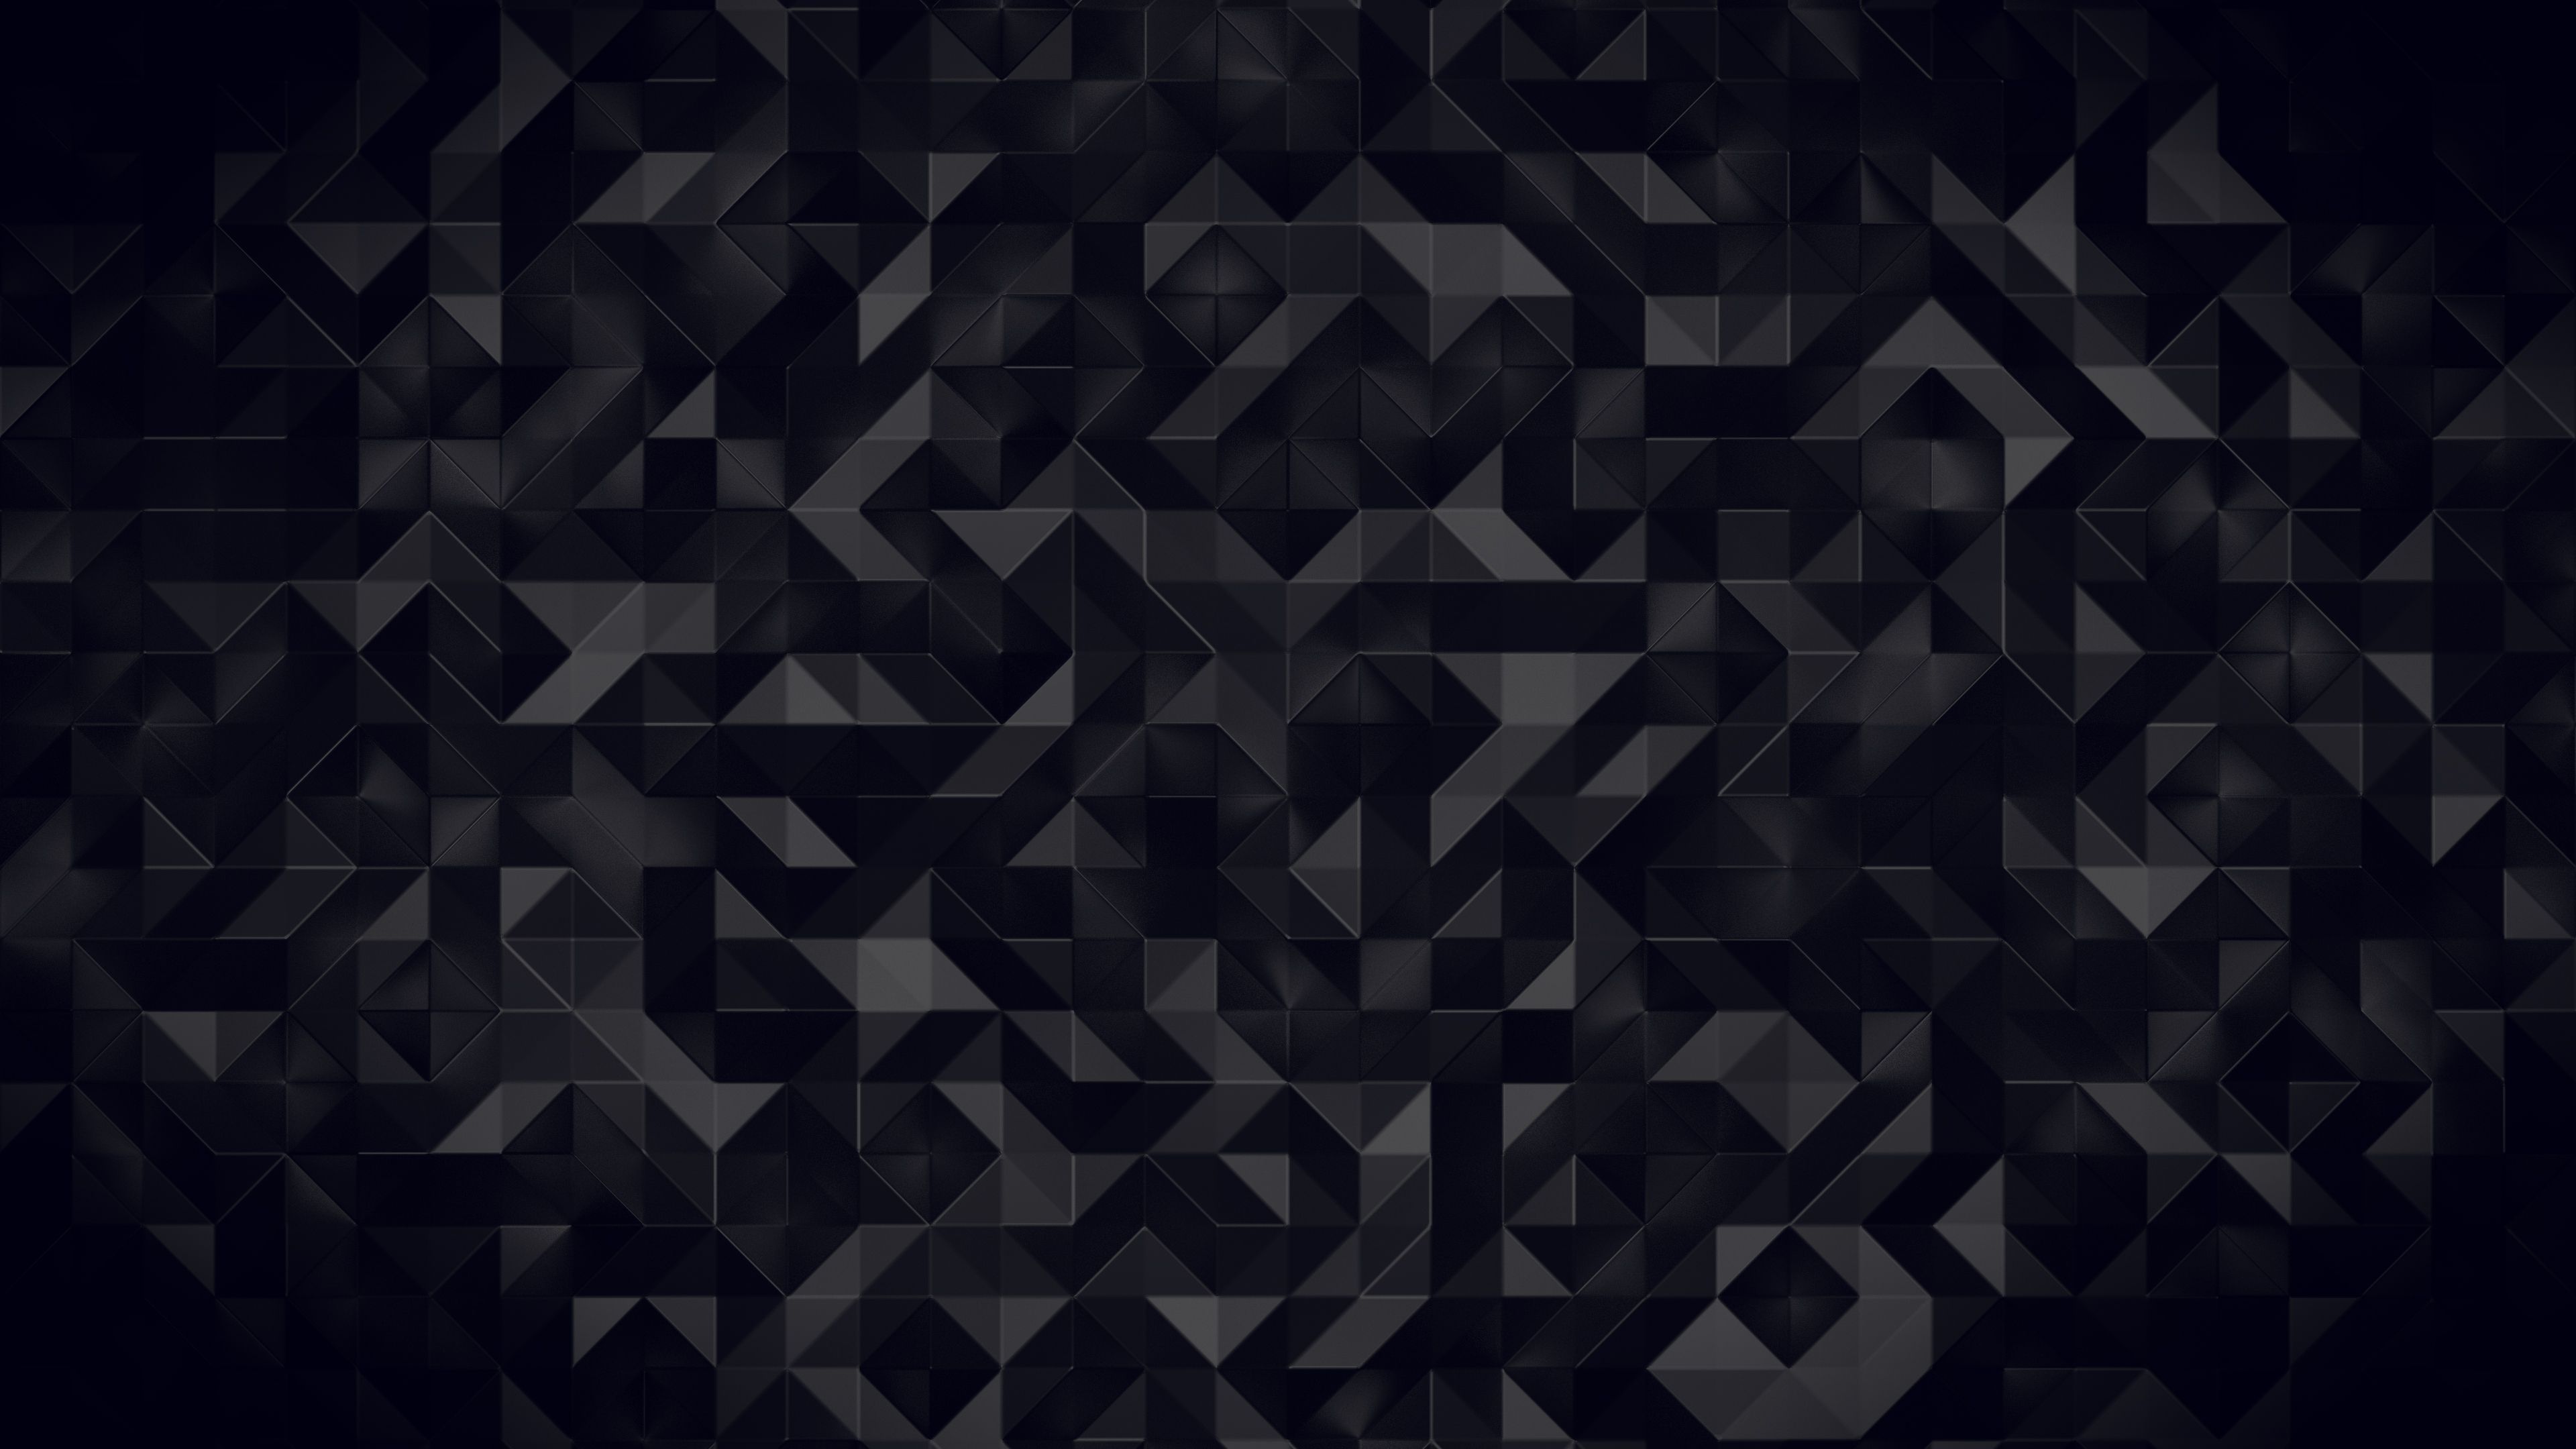 Black Abstract Wallpapers - Top 35 Best Black Abstract Wallpapers Download